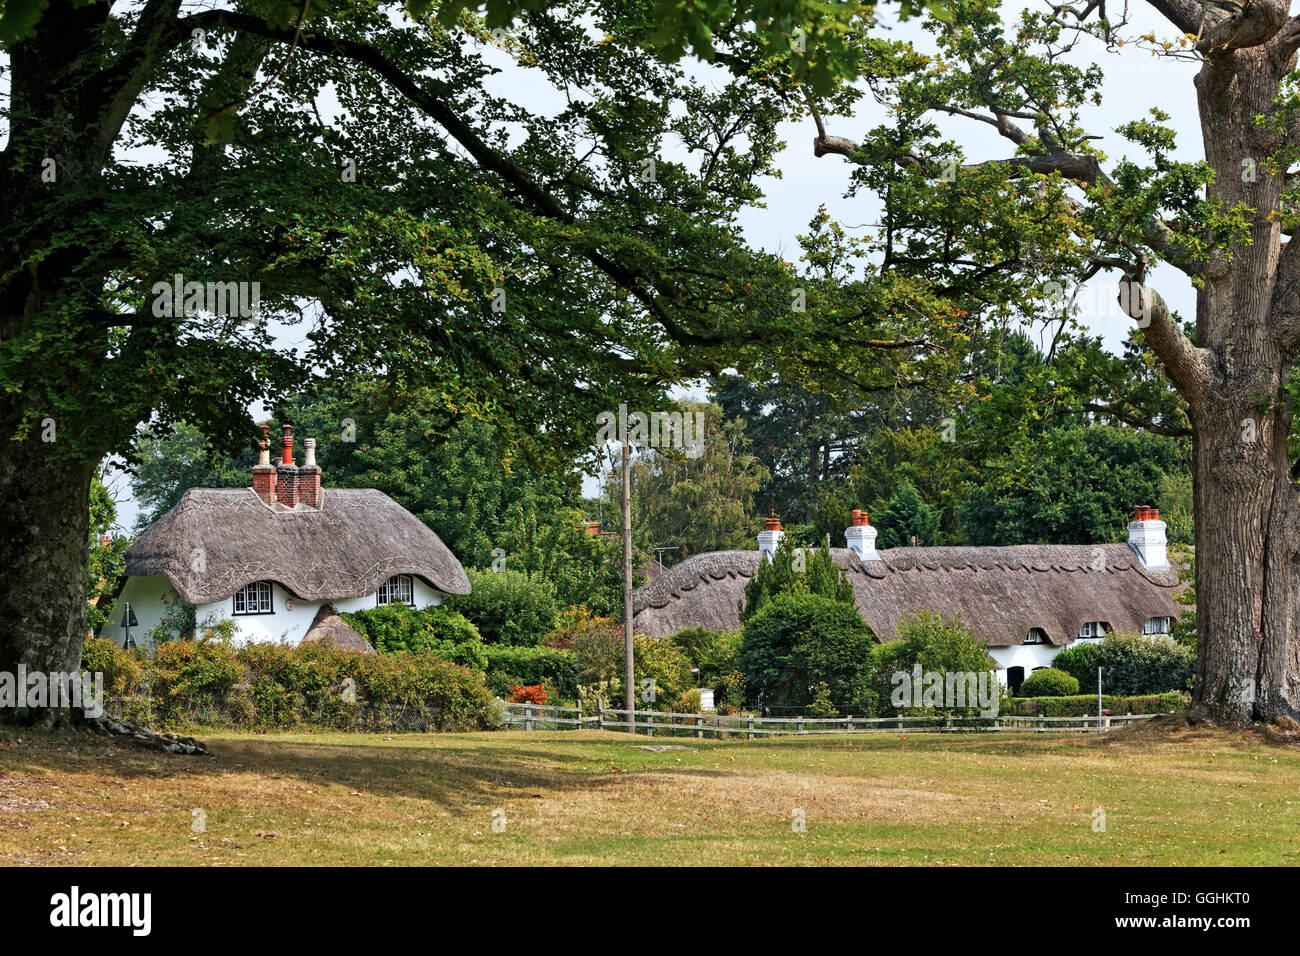 Thatched cottages, Lyndhurst, New Forest, Hampshire, England, Great Britain Stock Photo